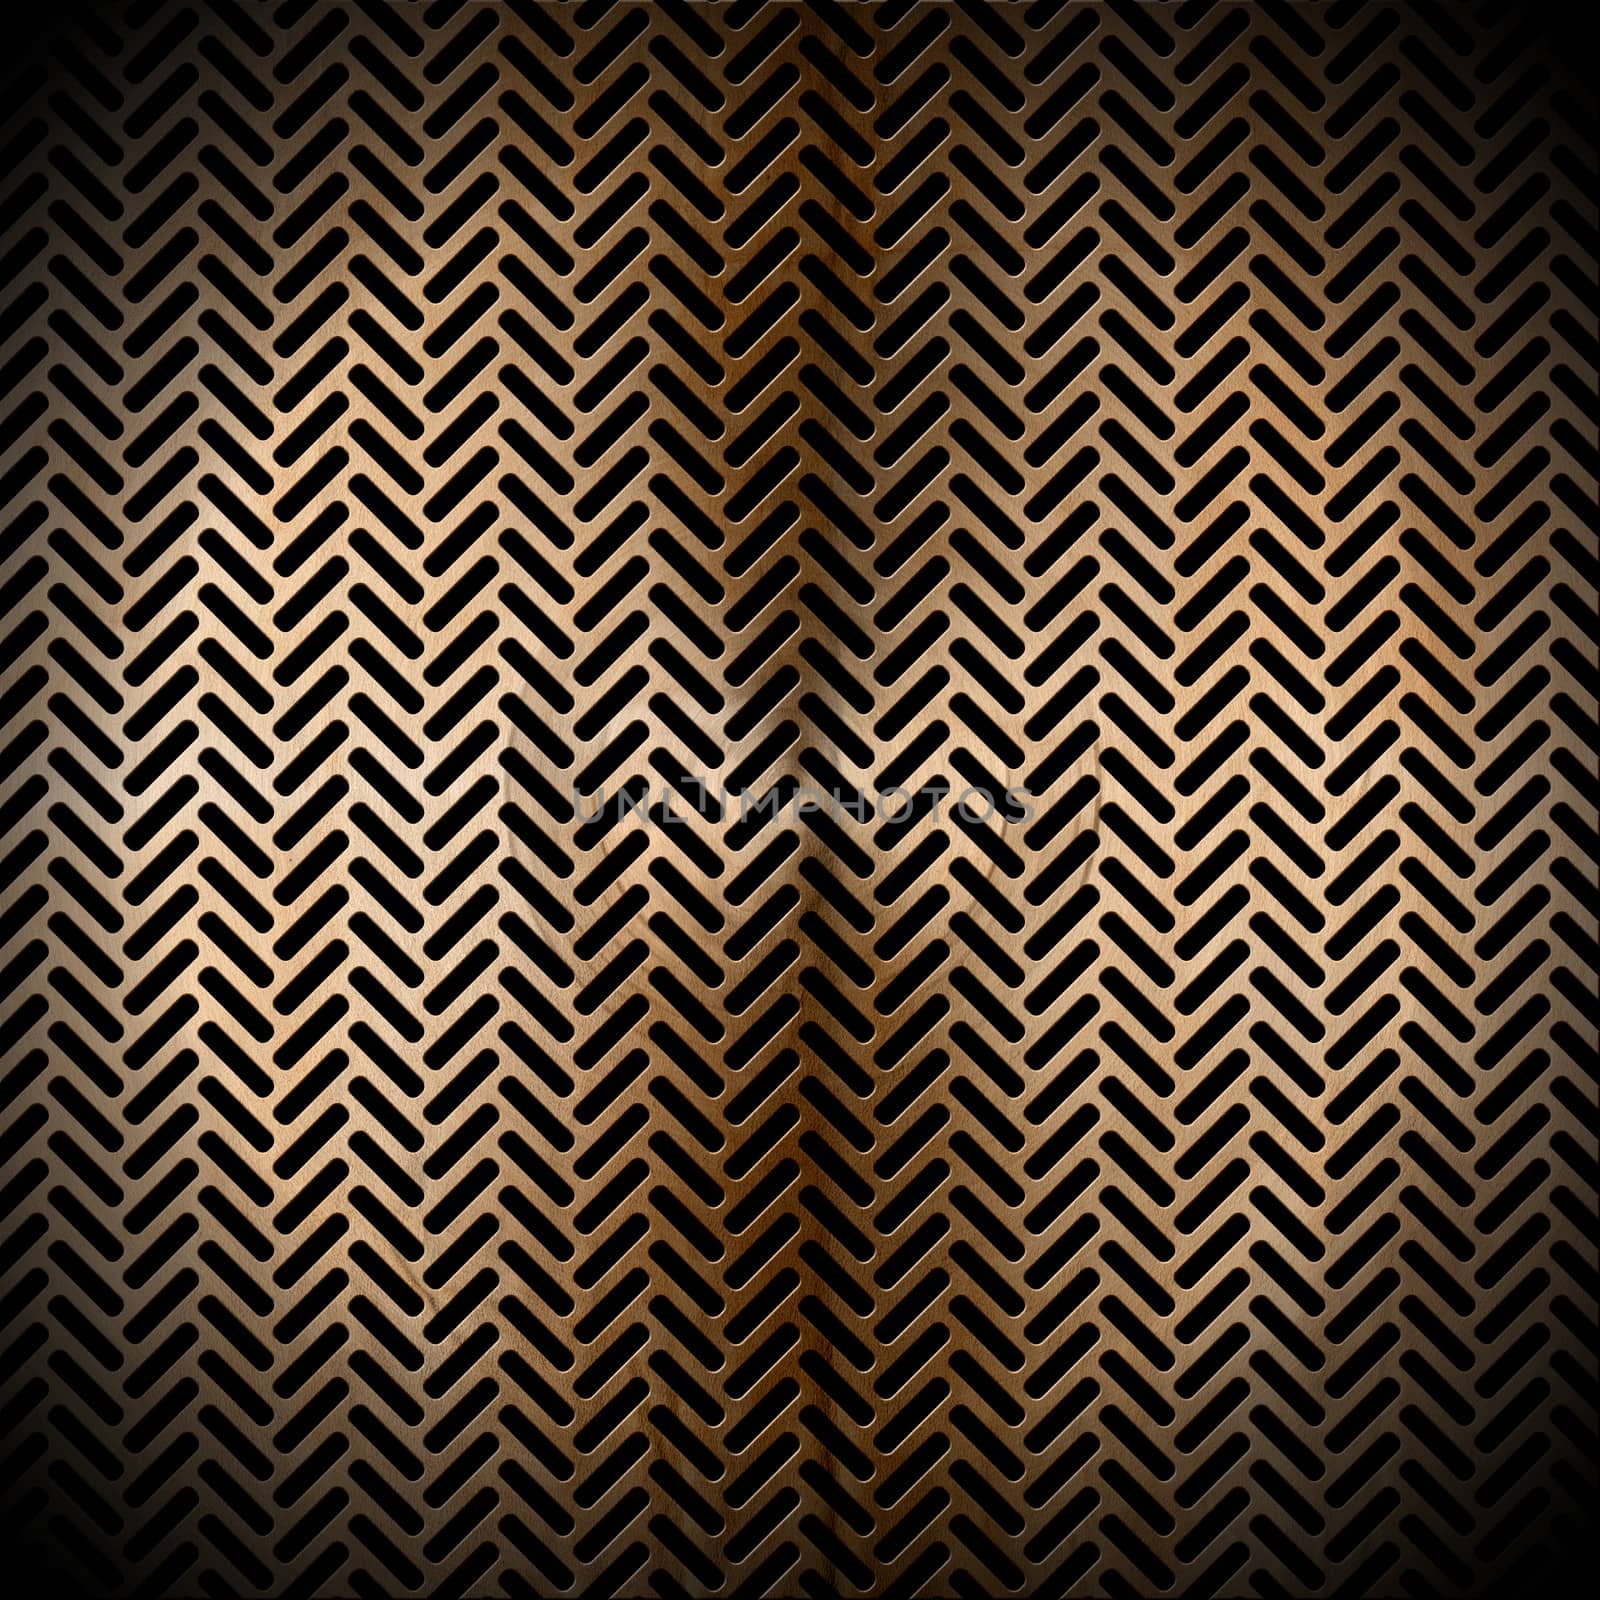 Metallic brown abstract background with grid and blacks holes
